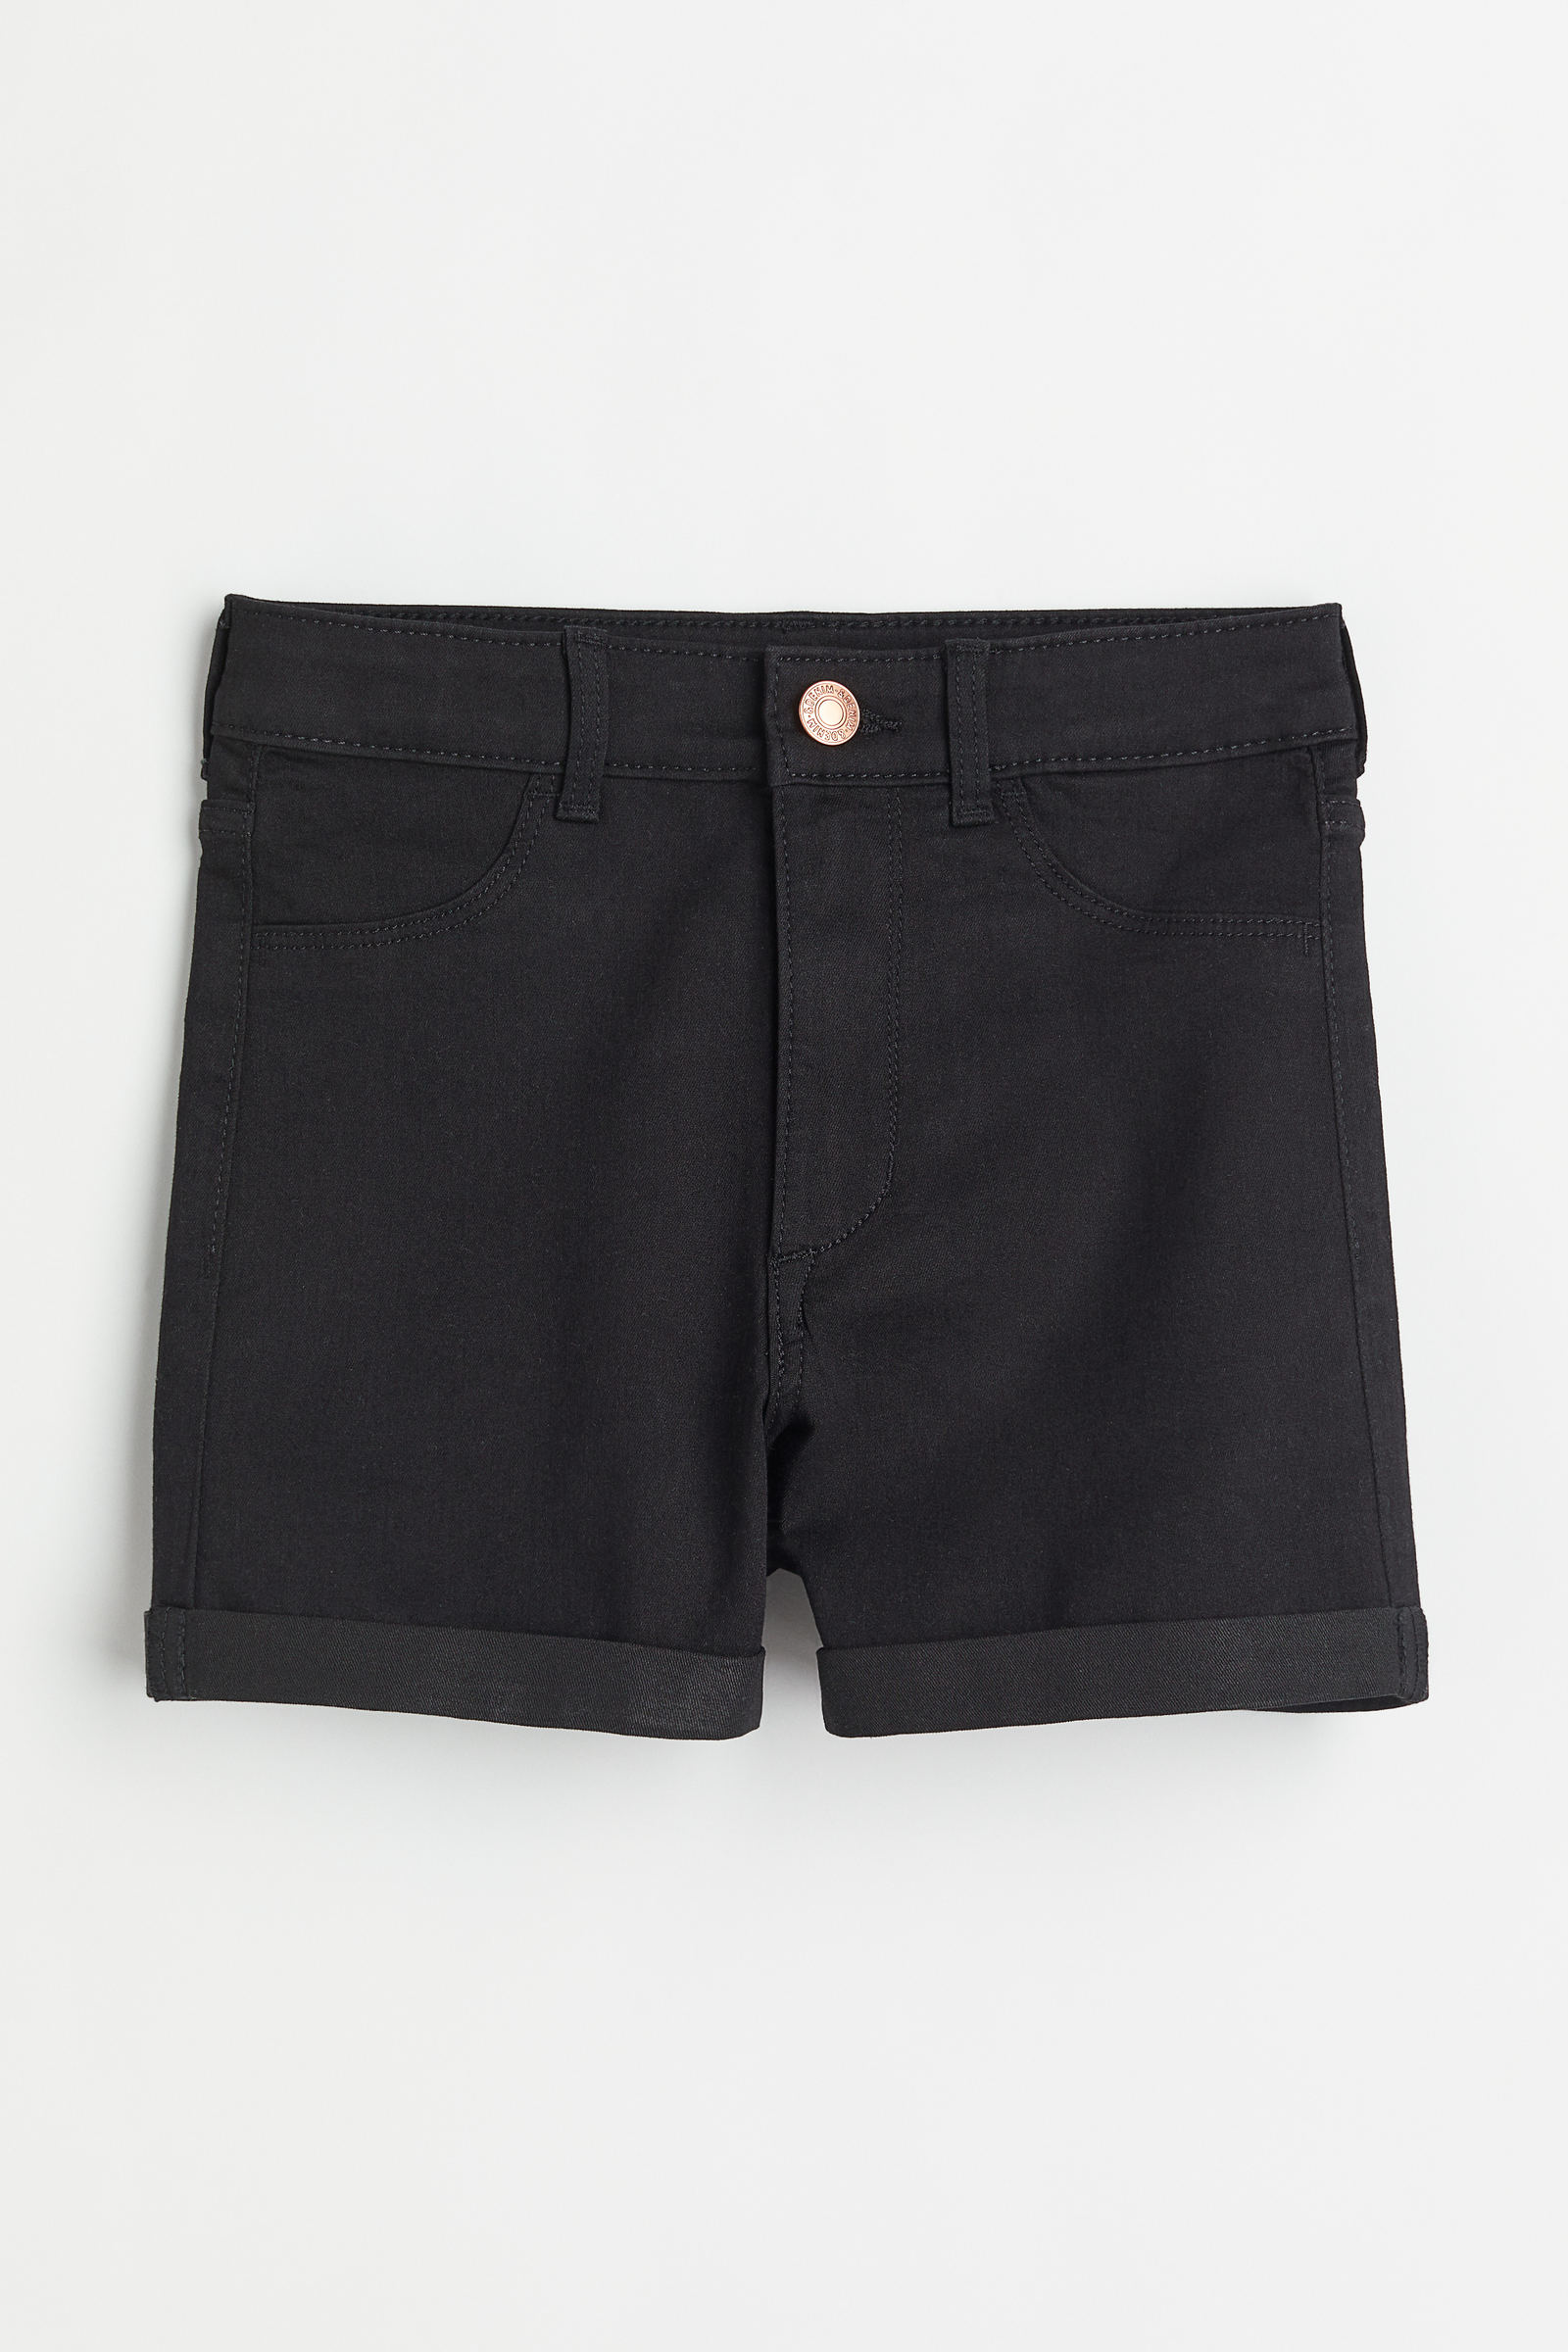 Shorts Slim Fit High - H&M CL